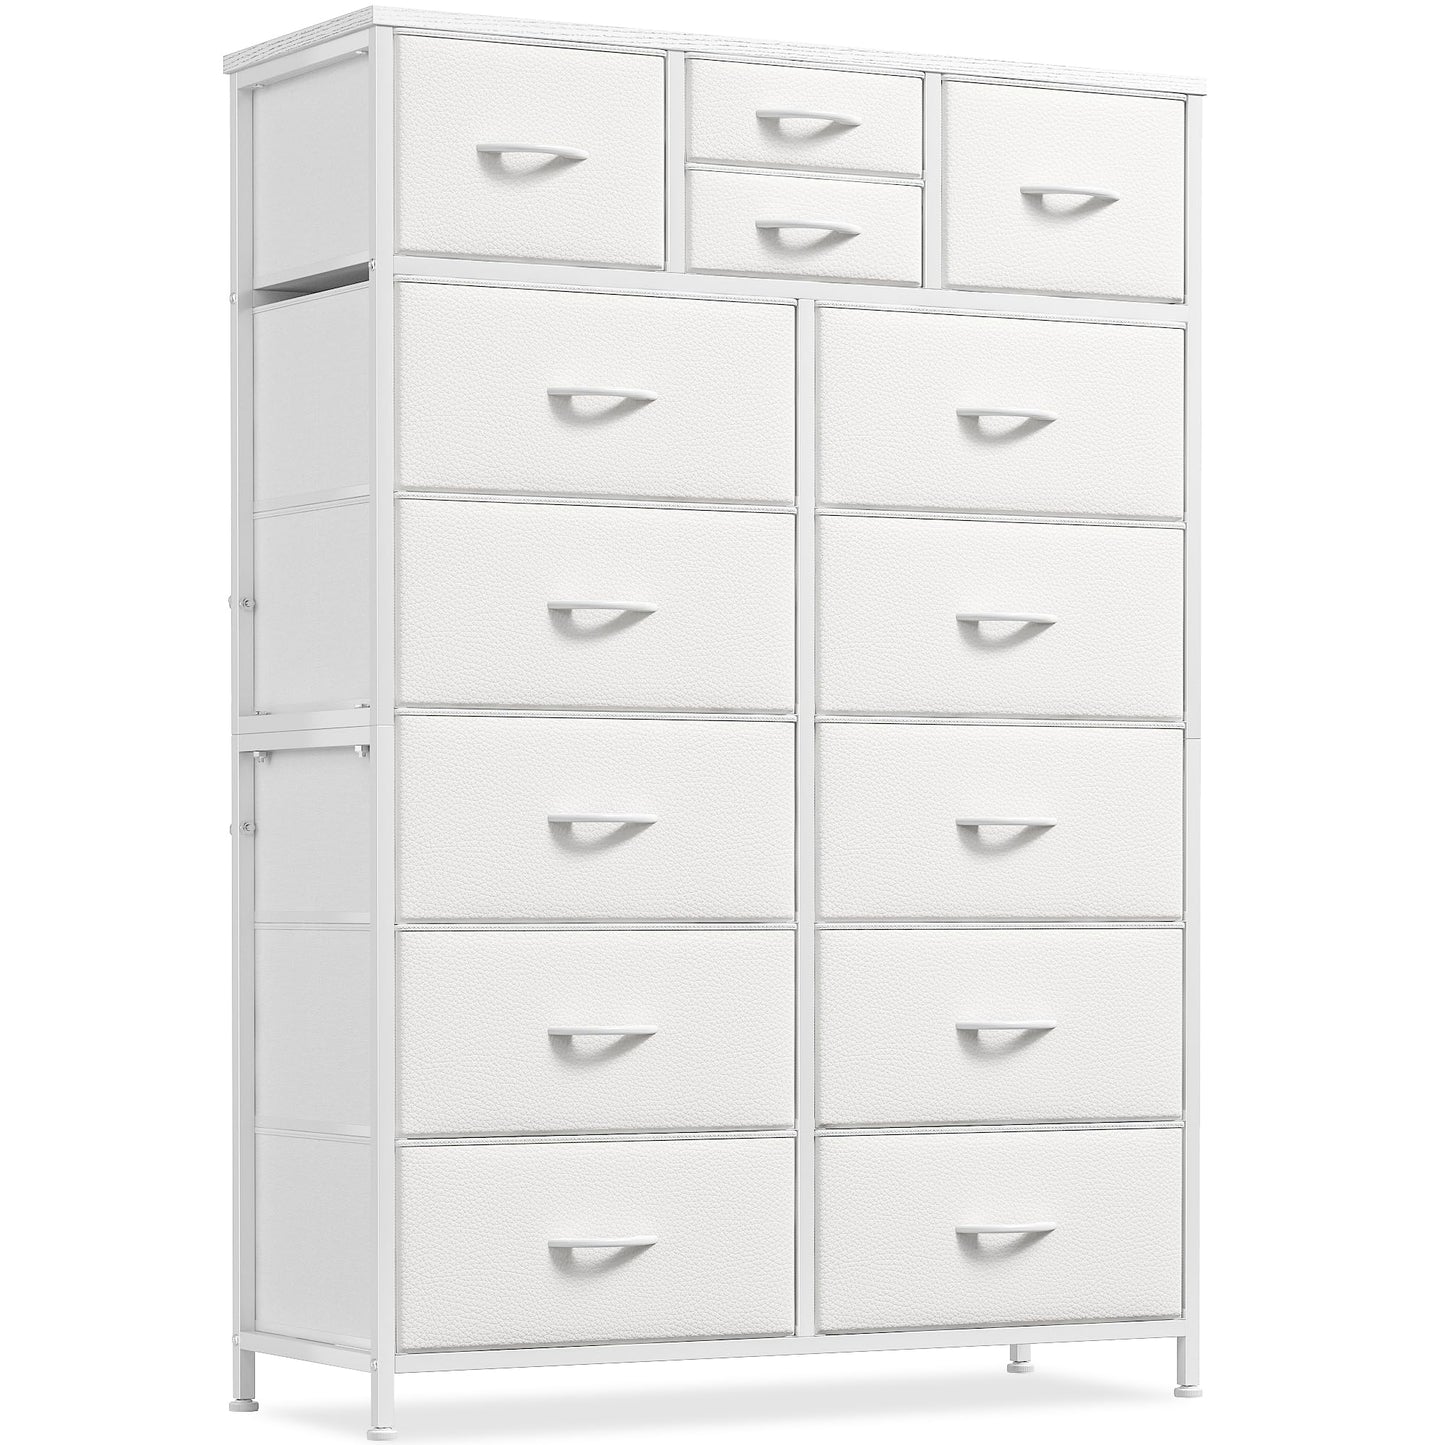 Hana Exports White Dresser for Bedroom with 14 Drawers, Tall Dressers for Bedroom with Wooden Top and Metal Frame, Large Fabric Bedroom Dressers & Chest of Drawers for Bedroom, Closet, Livingroom, White